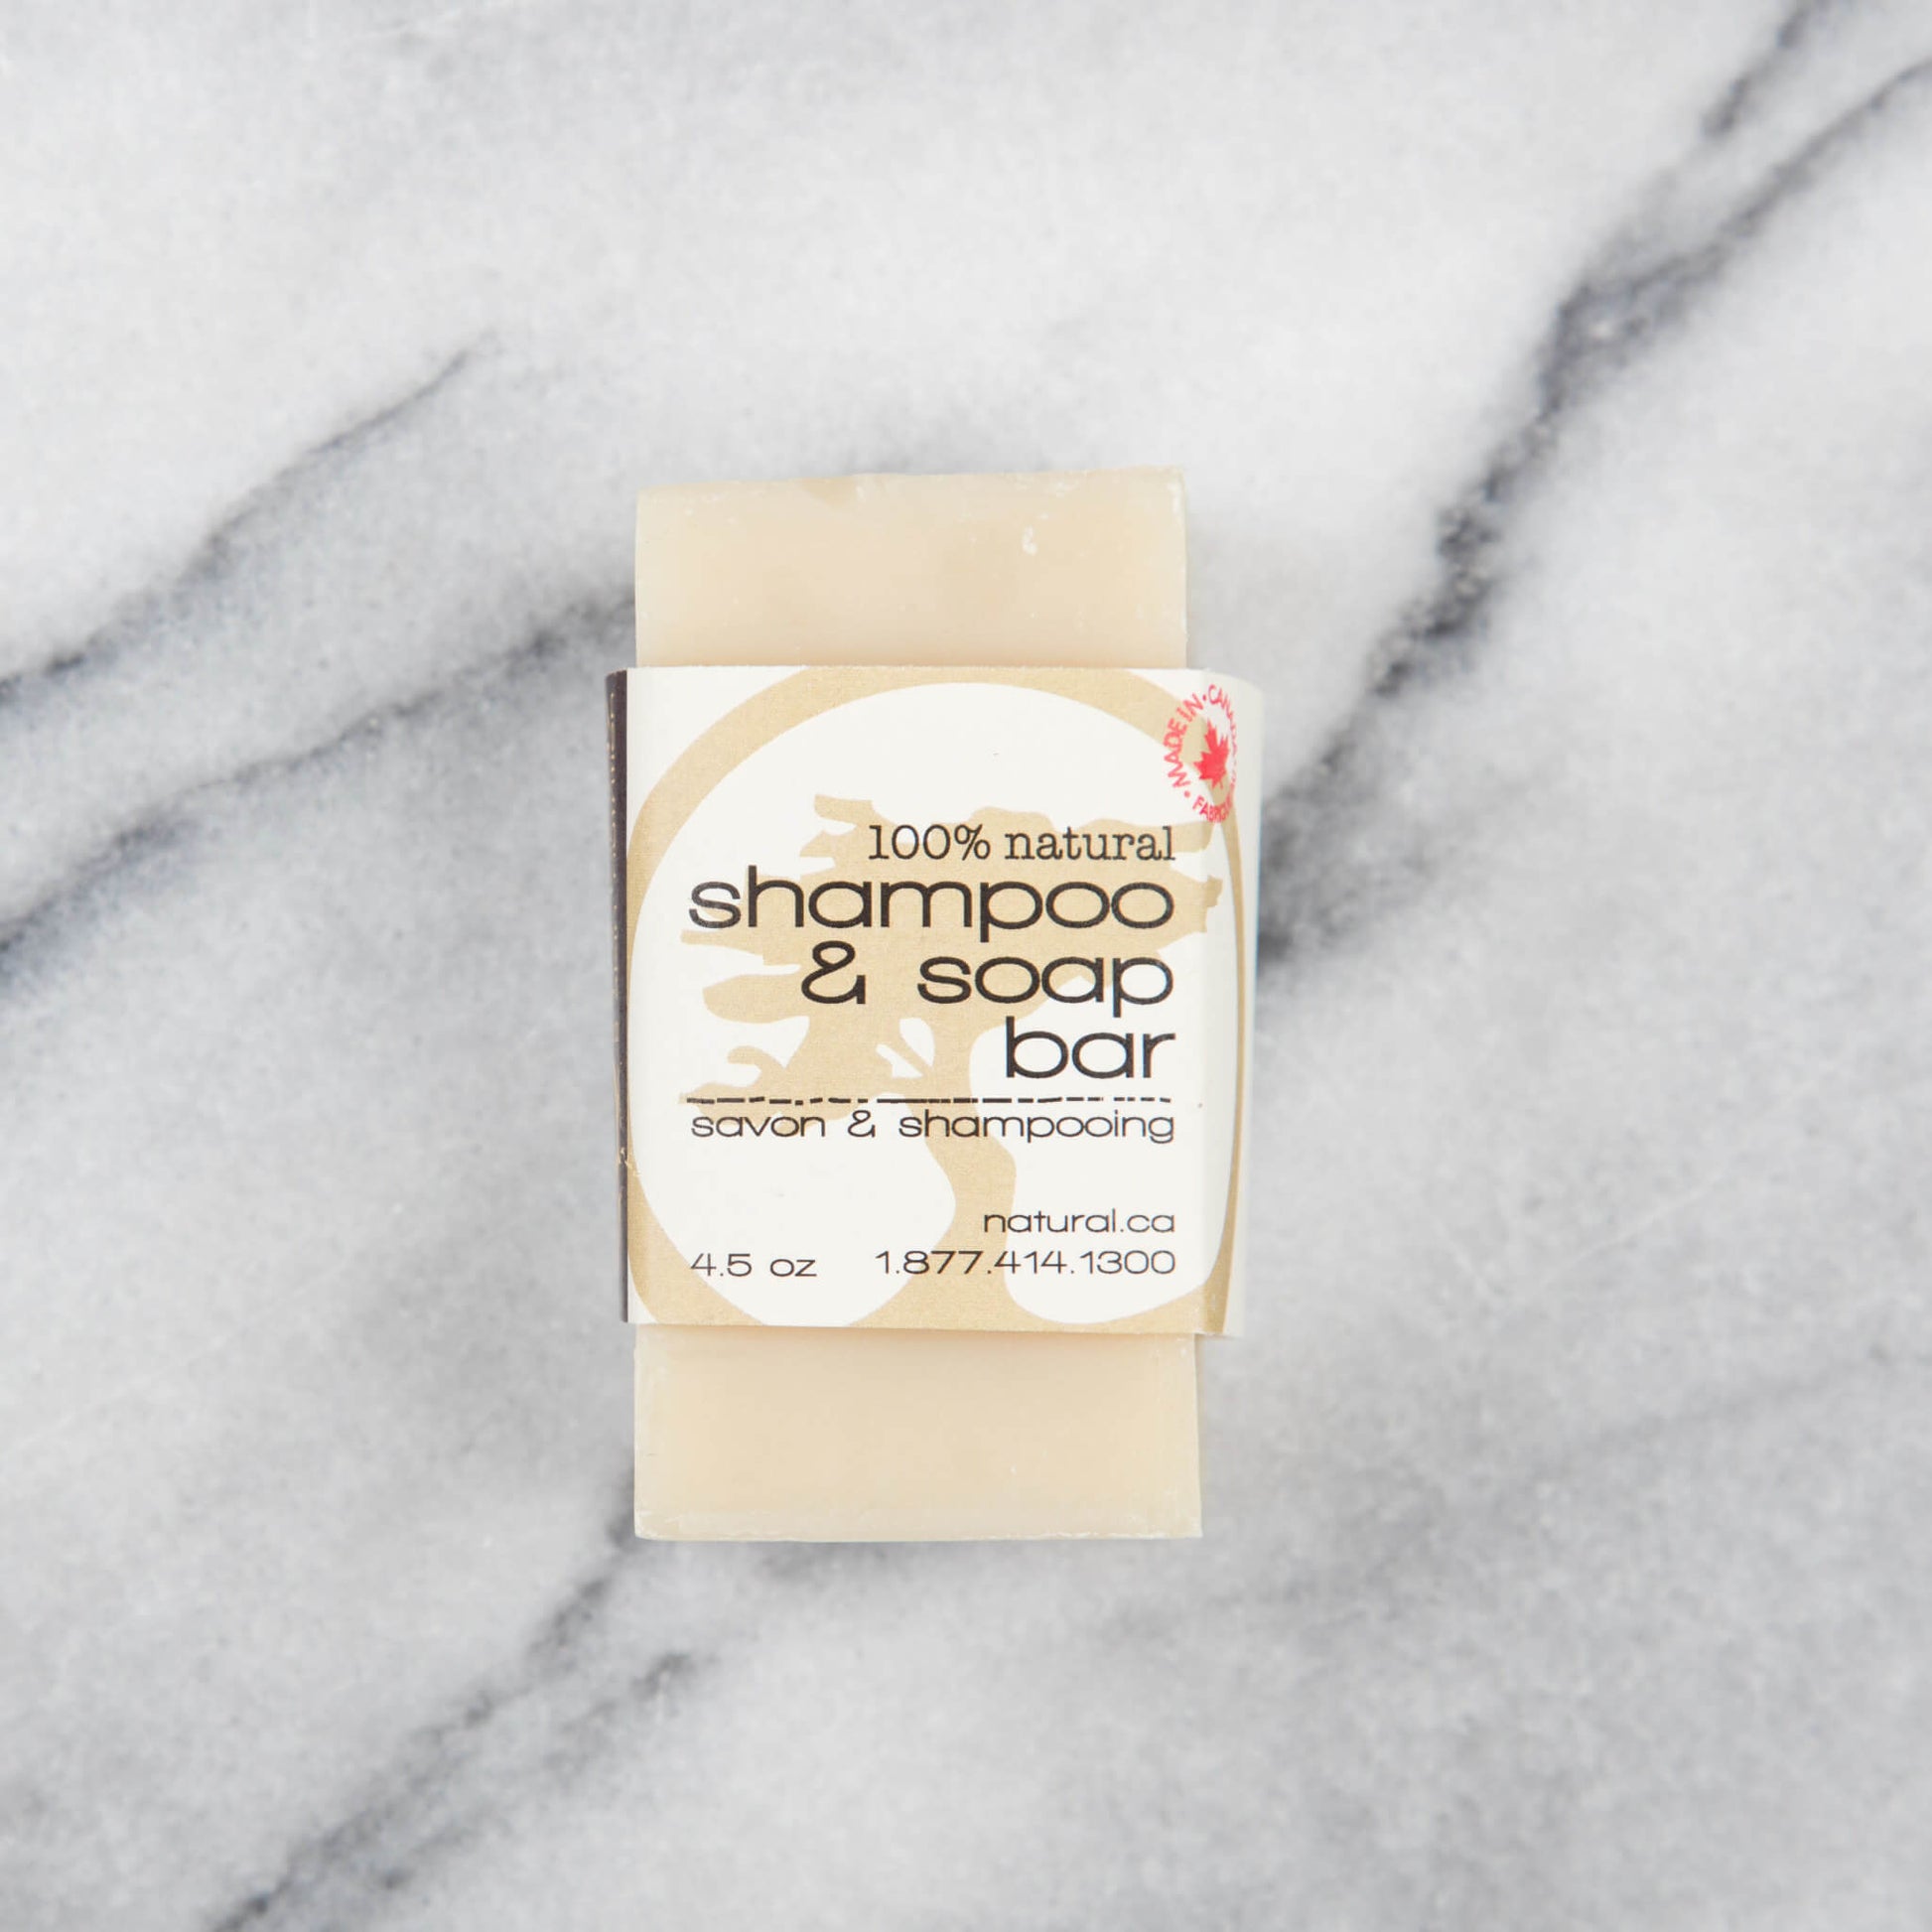 Earth to Body 100% natural shampoo and soap bar on marble counter